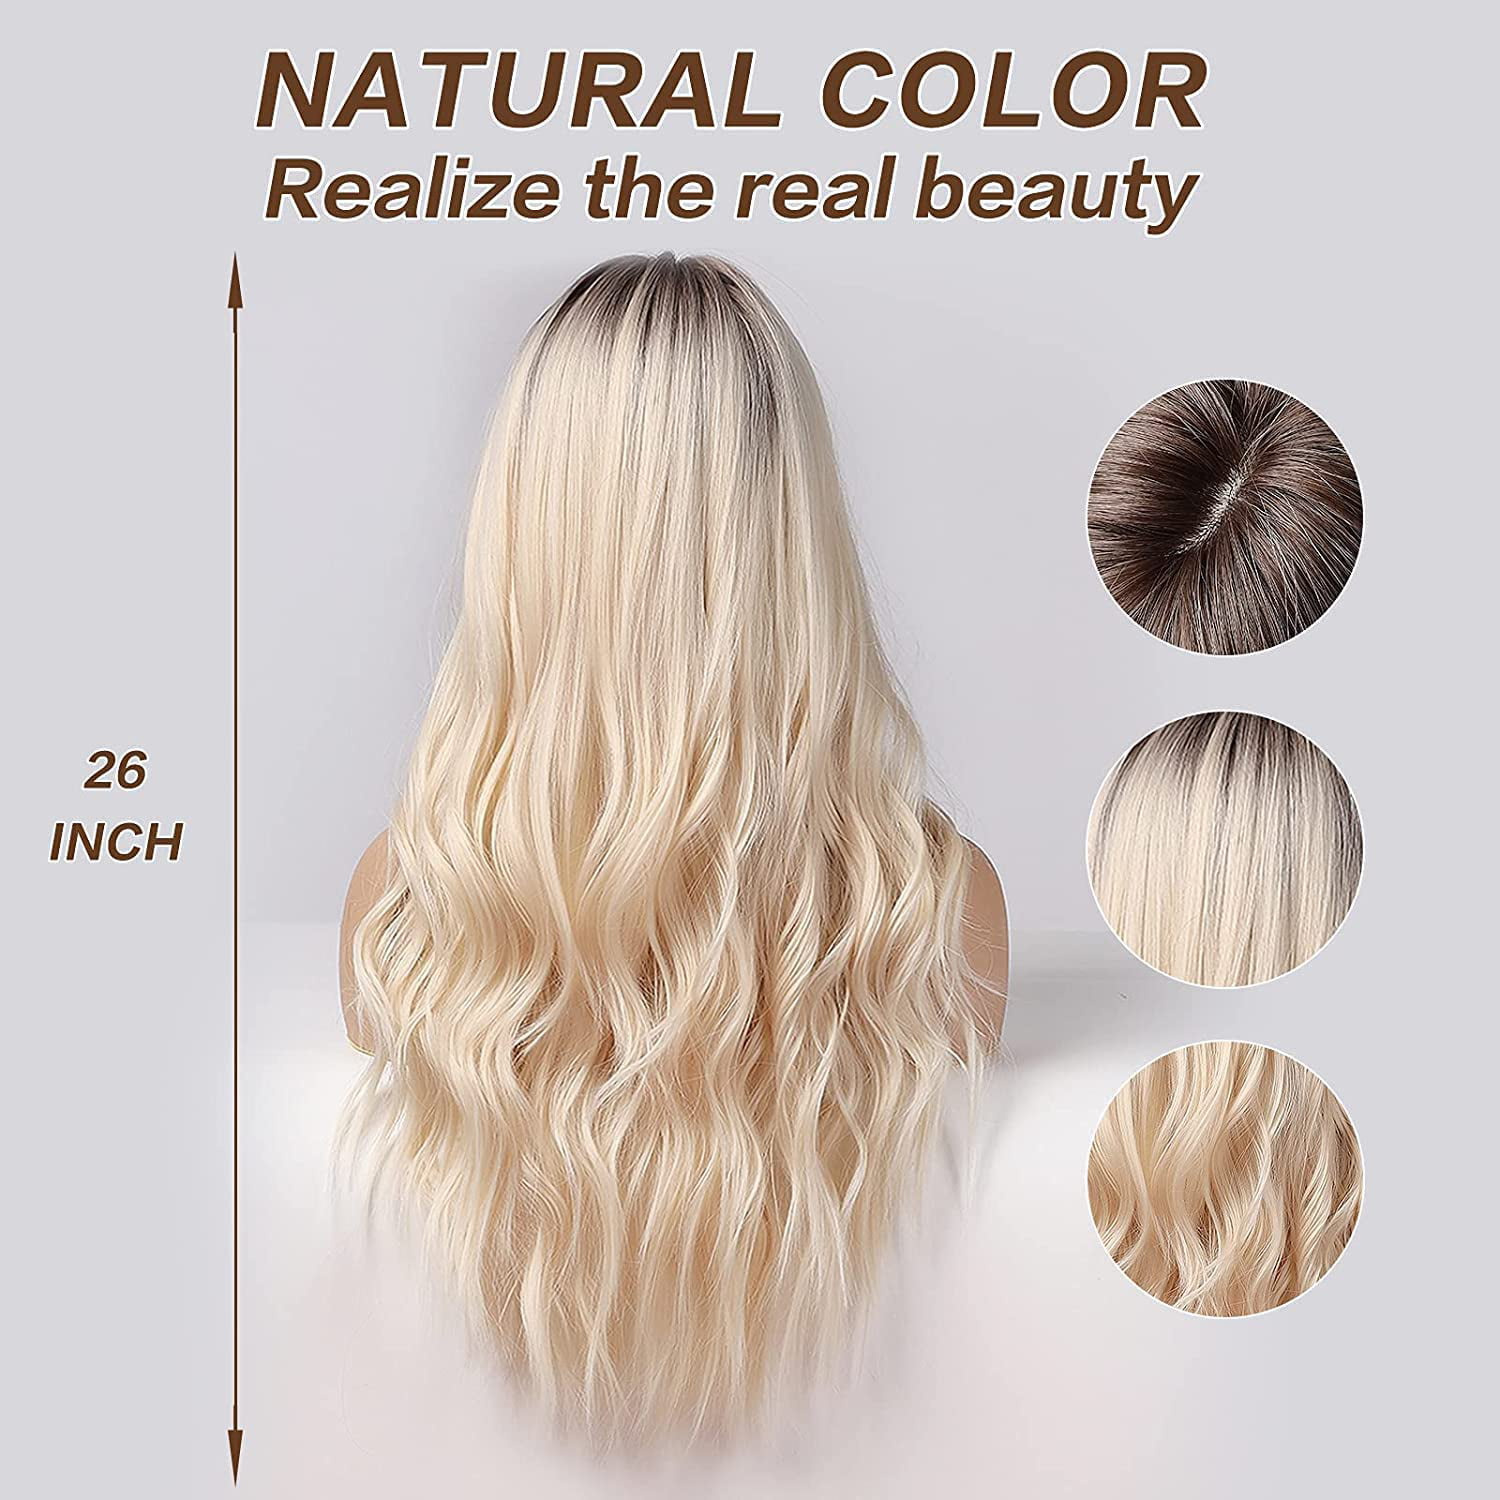 26 Inches Long Blonde Wigs for Women Natural Synthetic Hair Ombre Blonde  Wig with Dark Roots Synthetic Wig Loose Wavy Wigs Heat Resistant -  